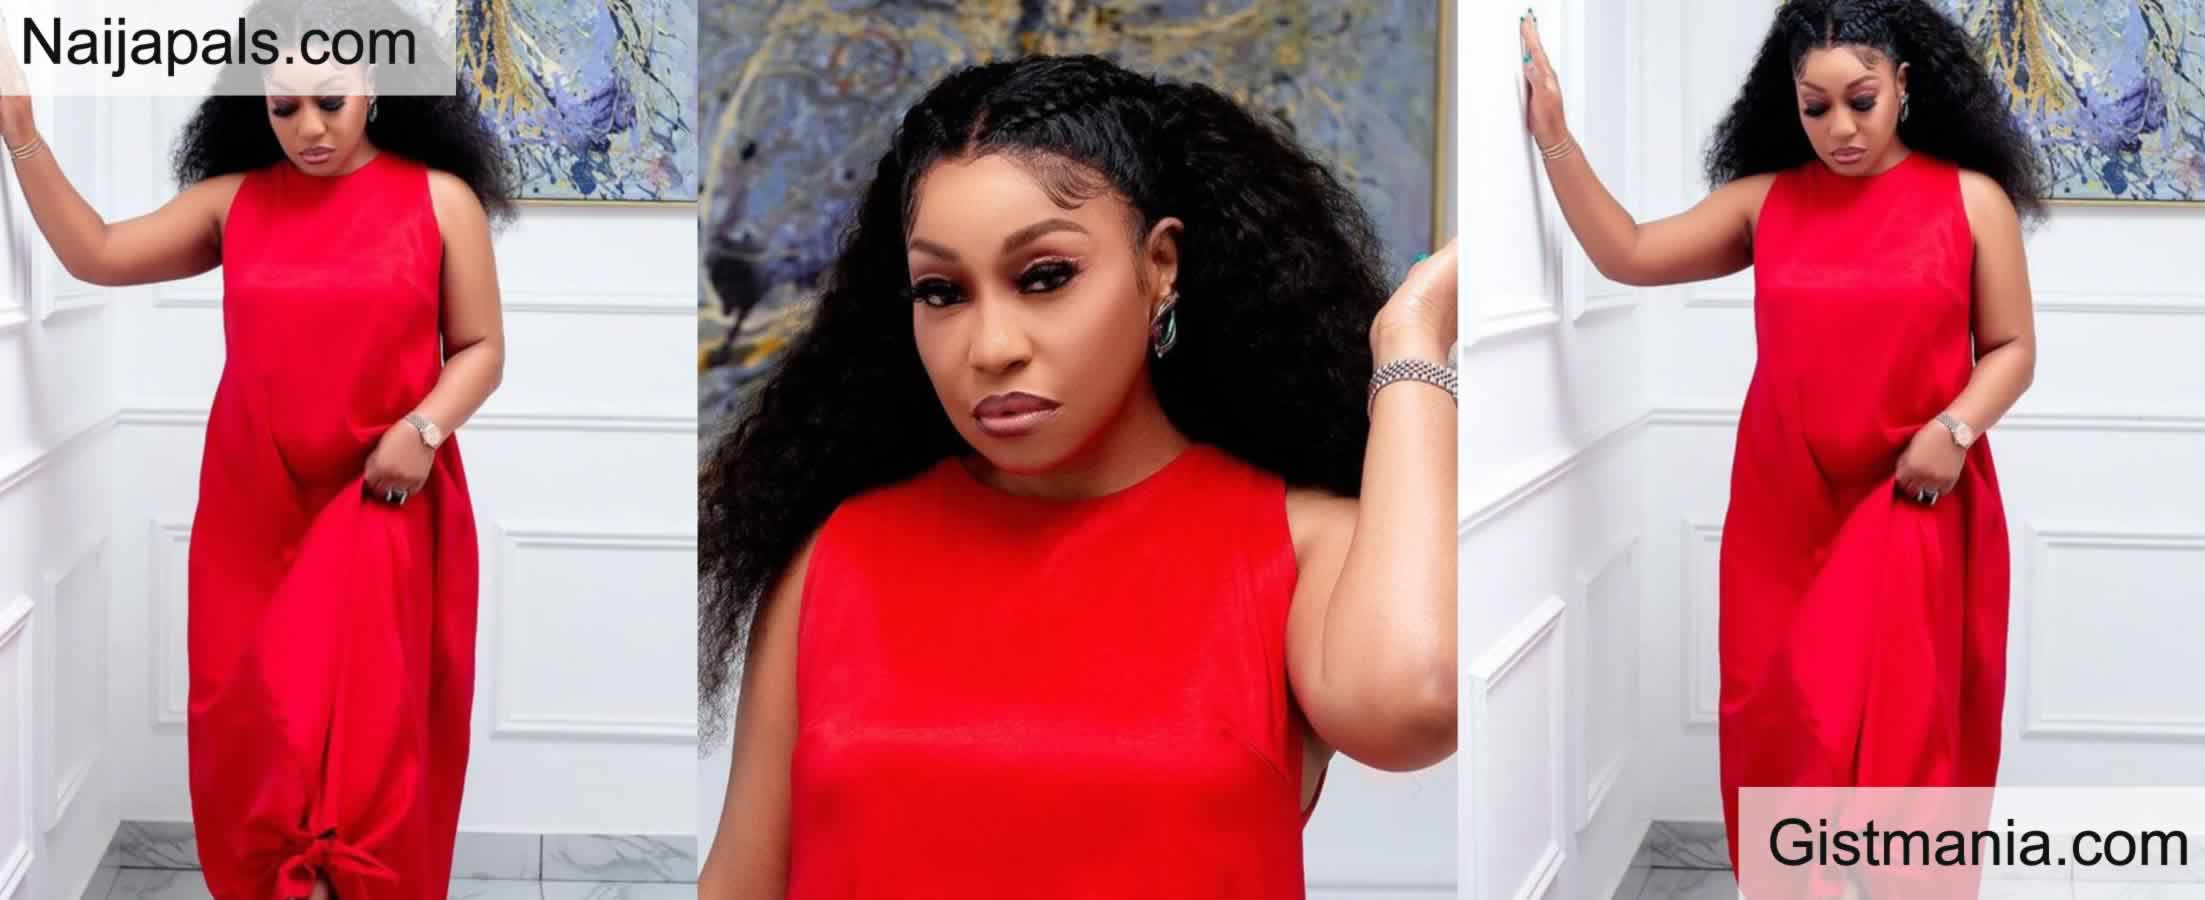 Actress Rita Dominic Reacts After Being Shamed For Taking On A Movie Role Considered Beneath Her